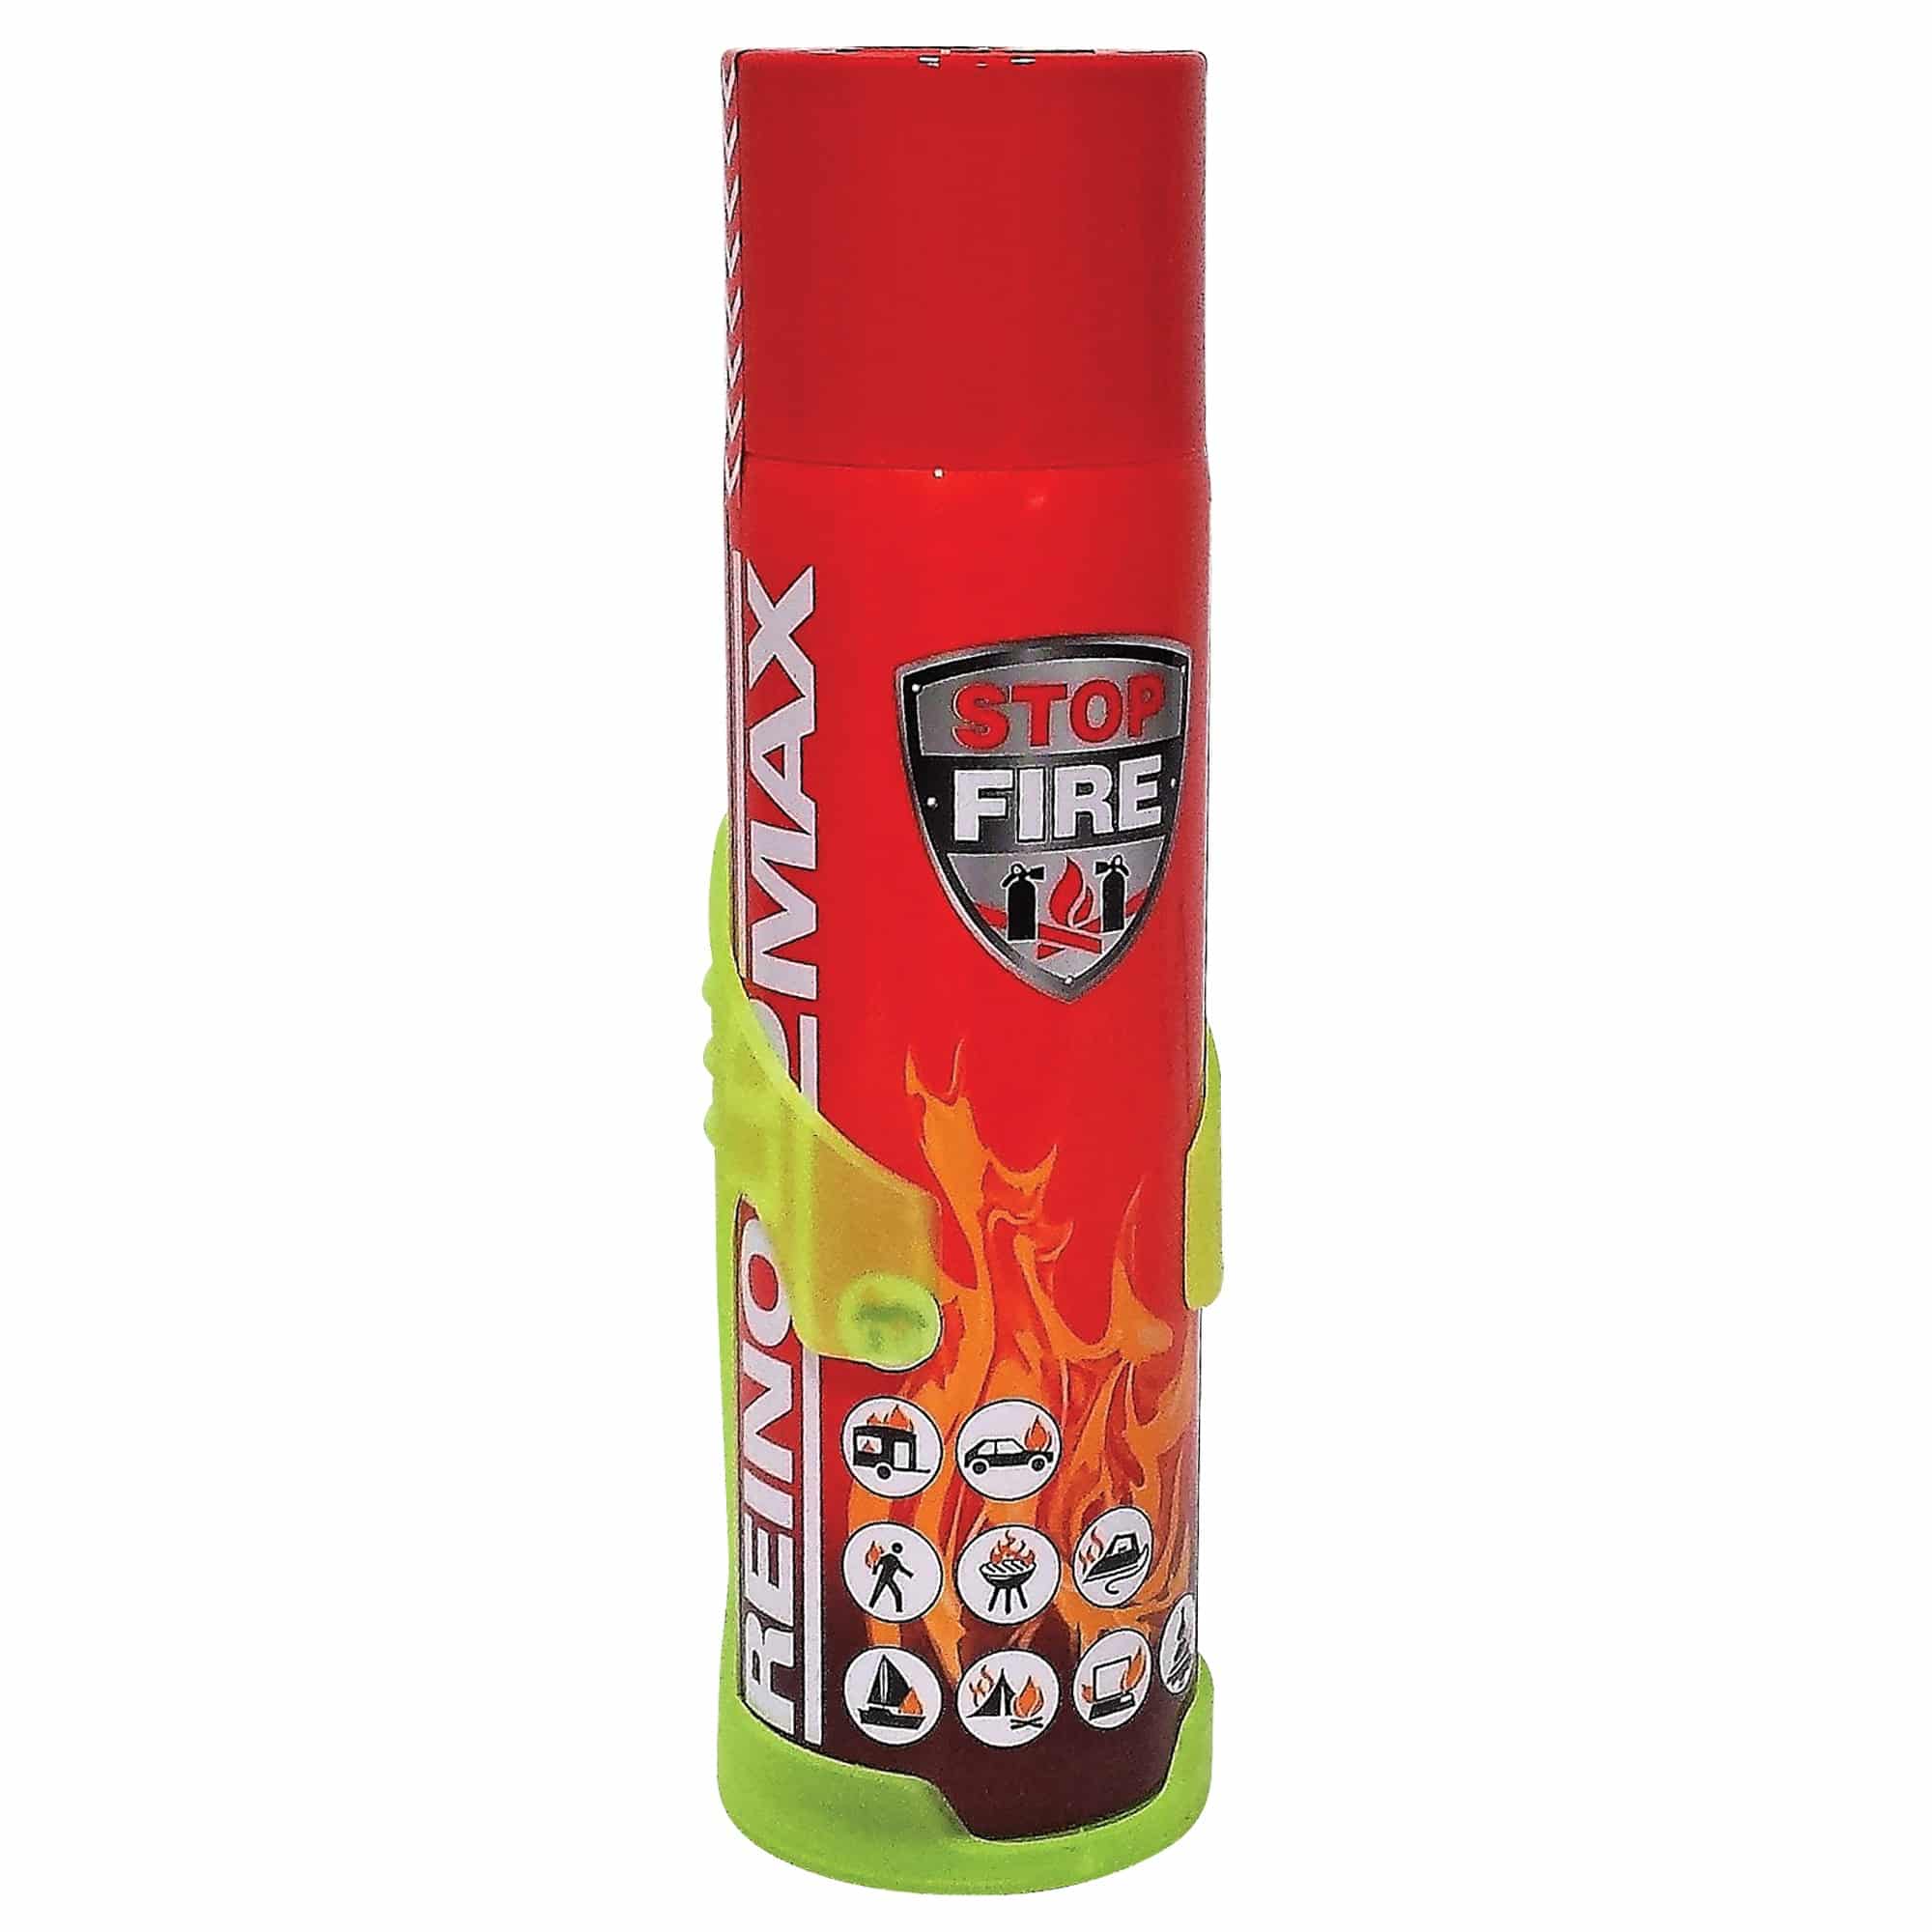 Foam Fire Extinguisher | Personal Protective Equipment | Buy Canadian ...